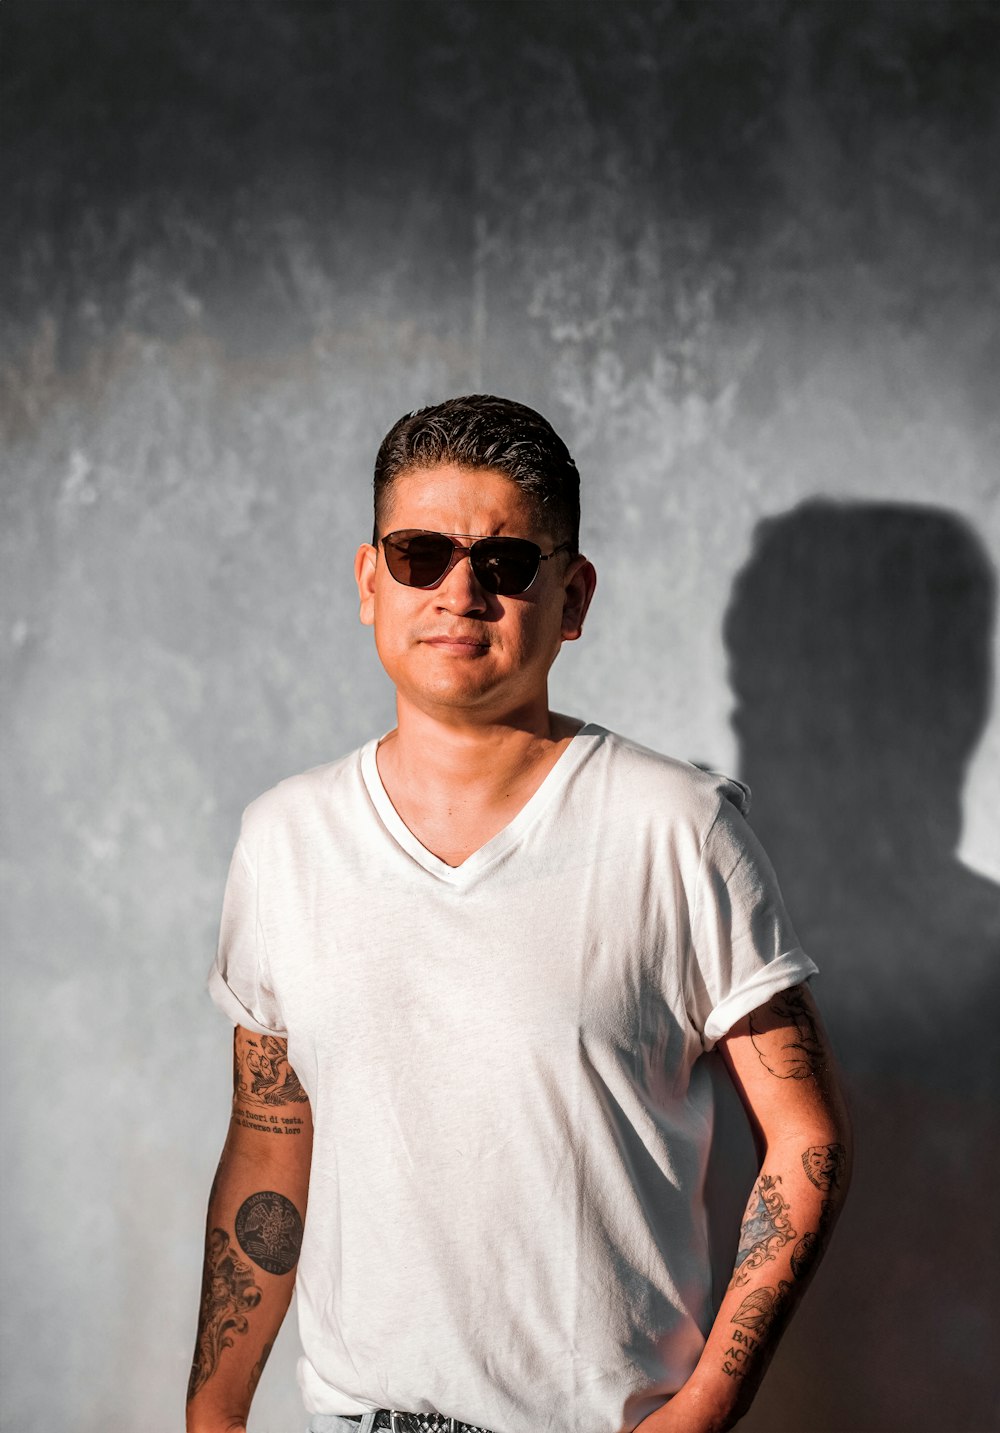 a man in a white shirt and sunglasses standing in front of a wall